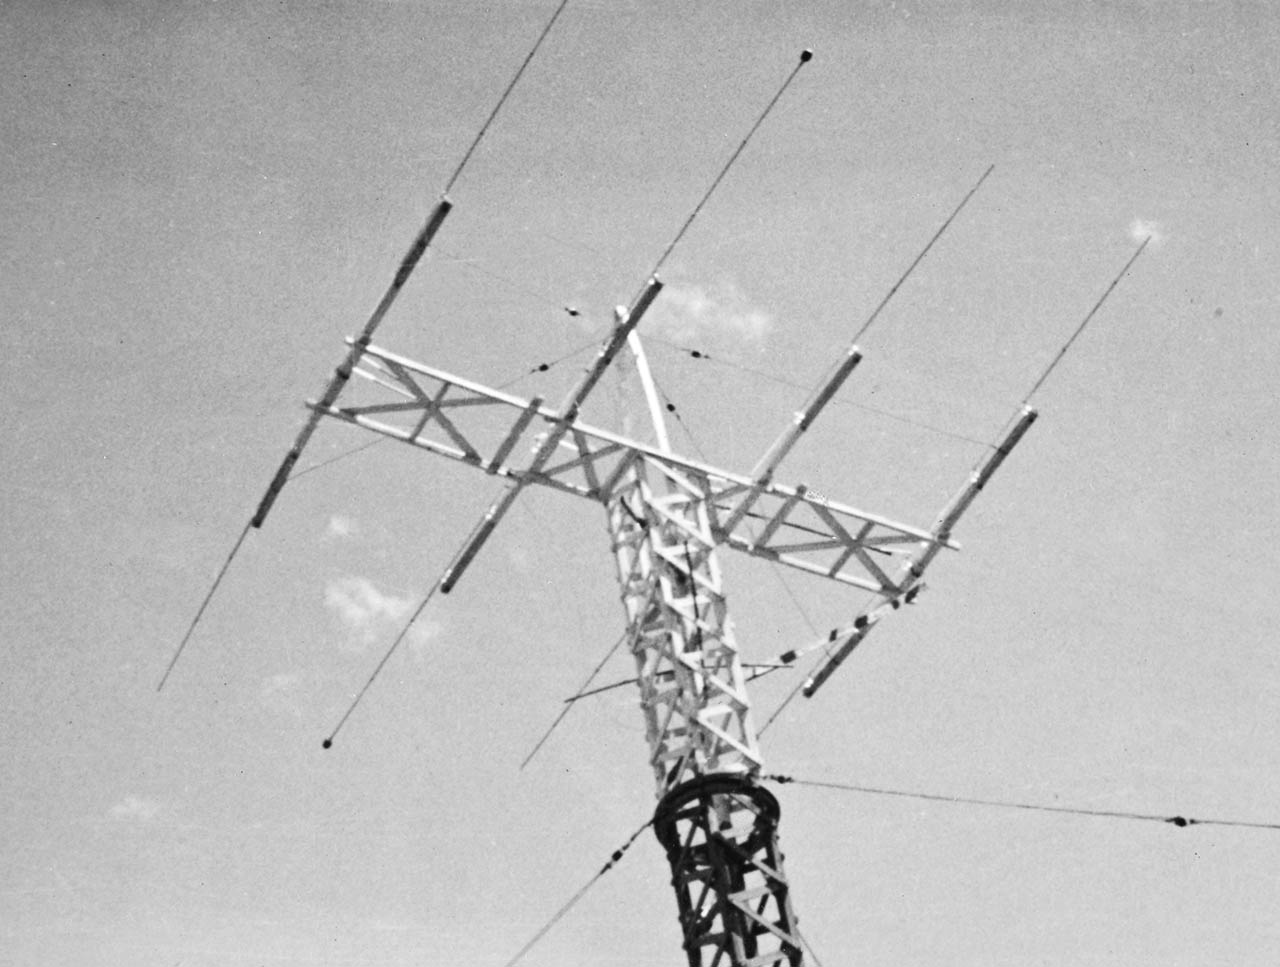 The original antenna at HCJB with copper toilet tank floats on the tips